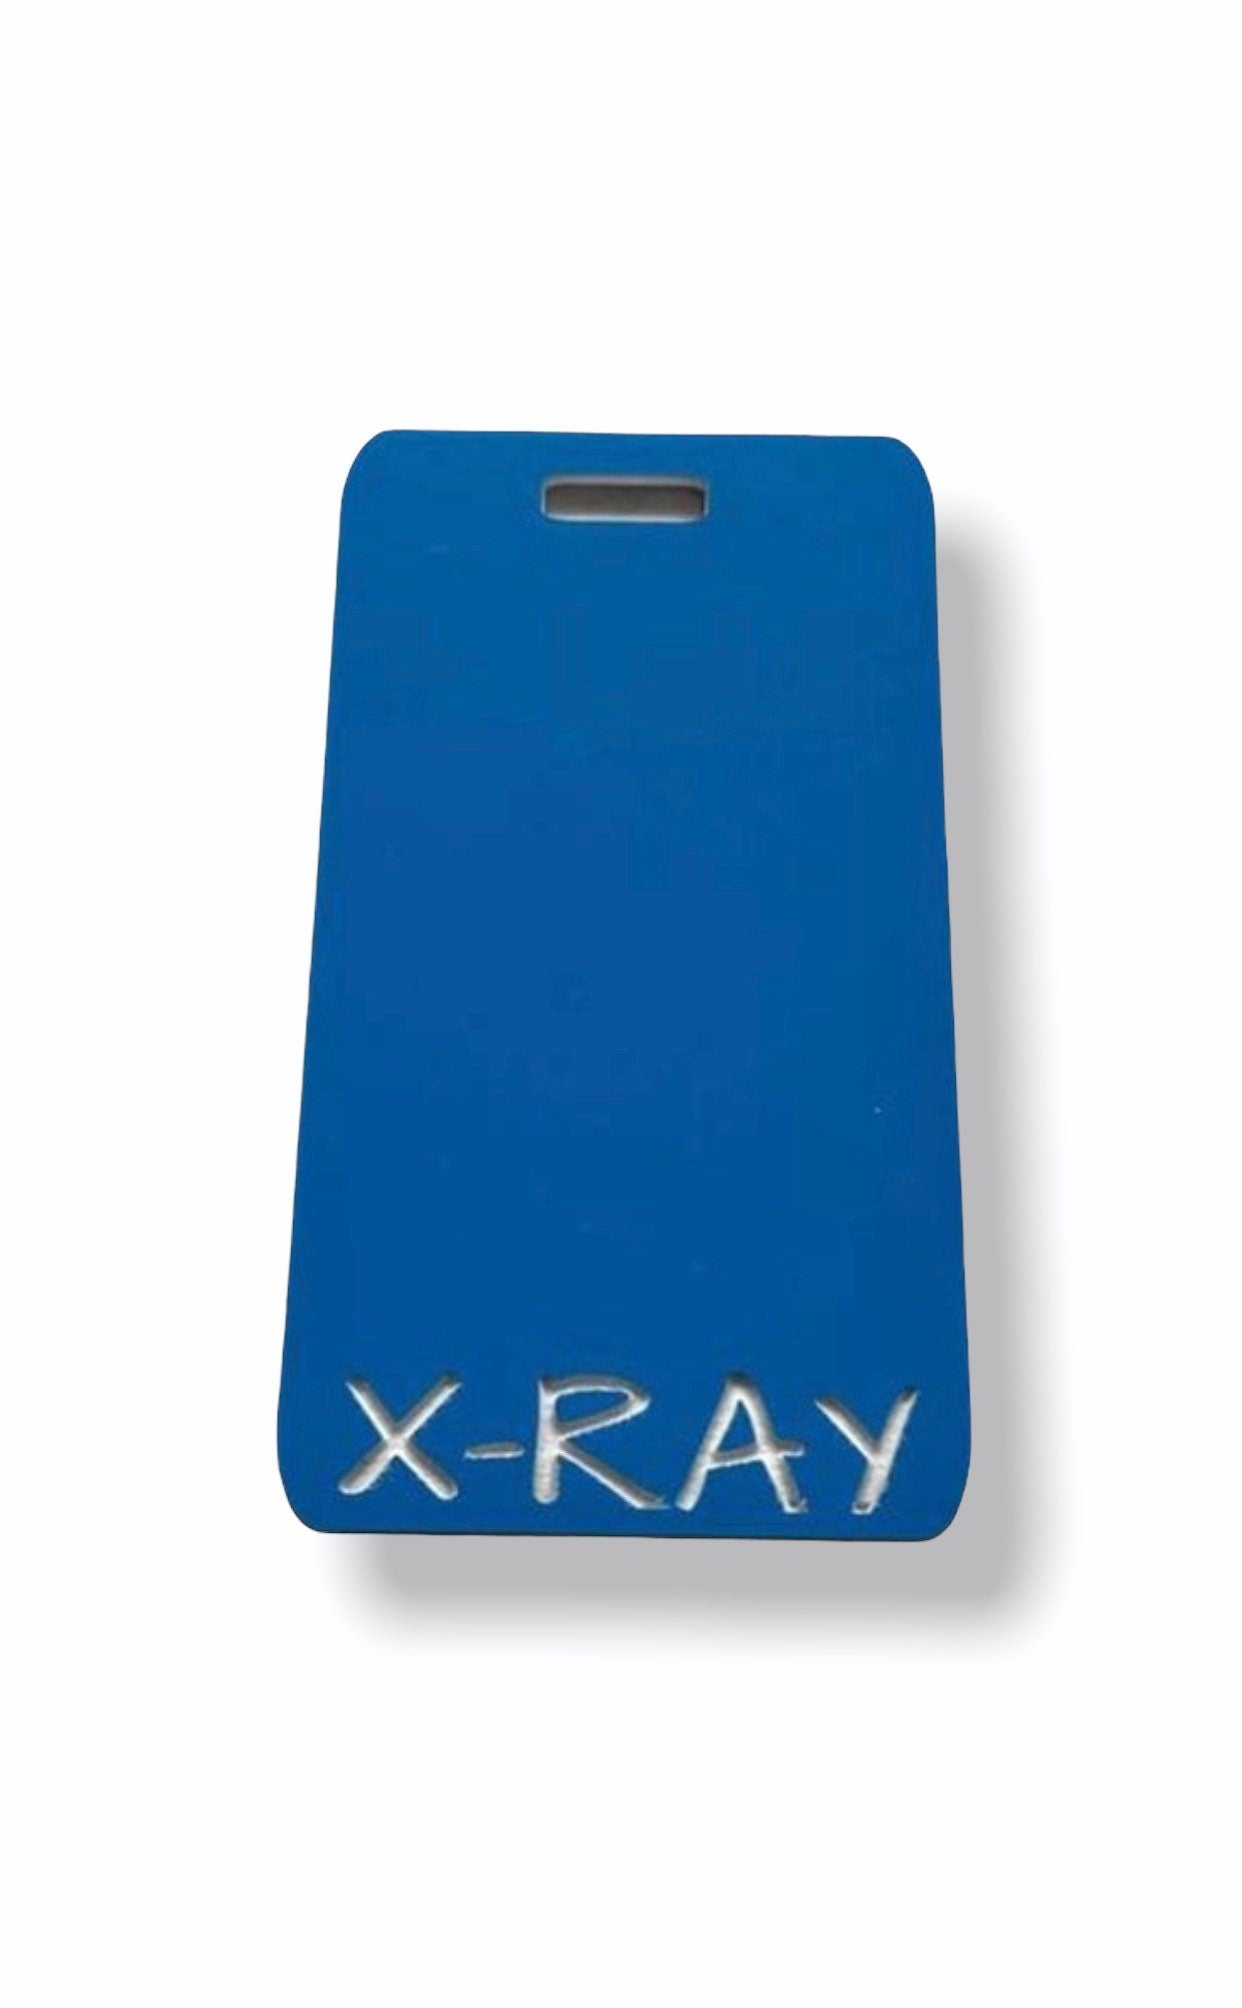 Rad Pad with Etched Wording if your choice for Holding Xray Markers